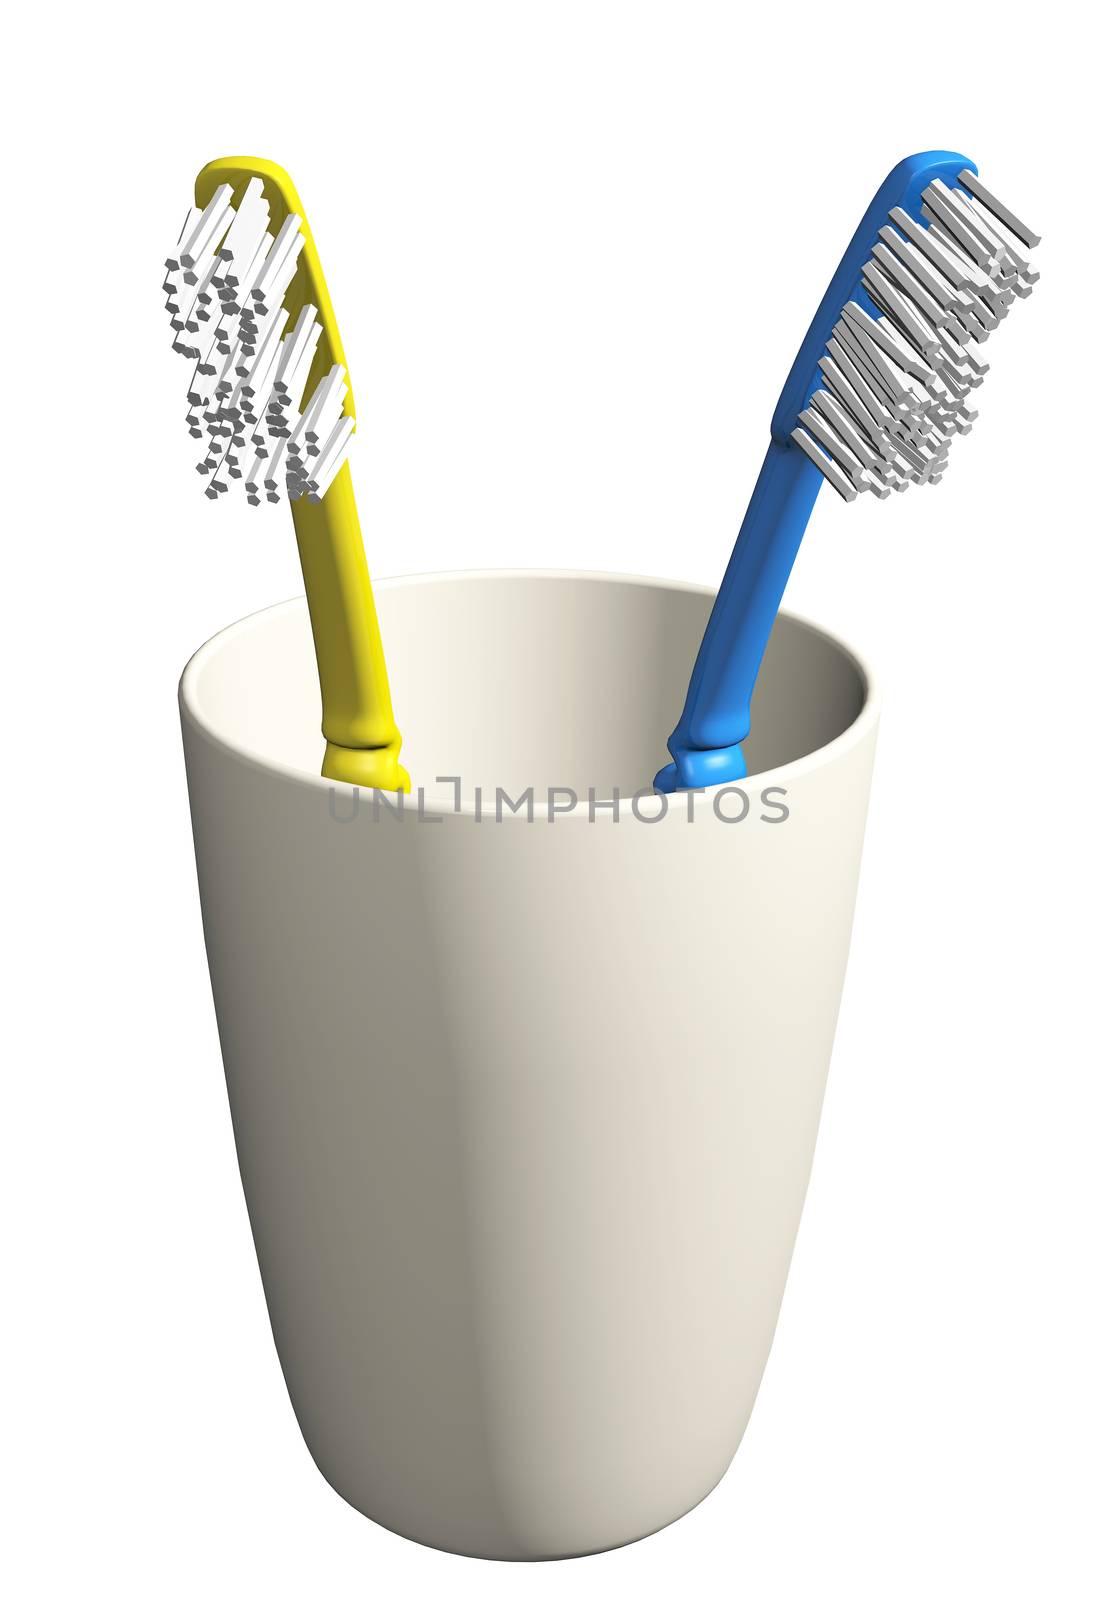 Two toothbrushes in a simple glass, 3D illustration, isolated against a white background.